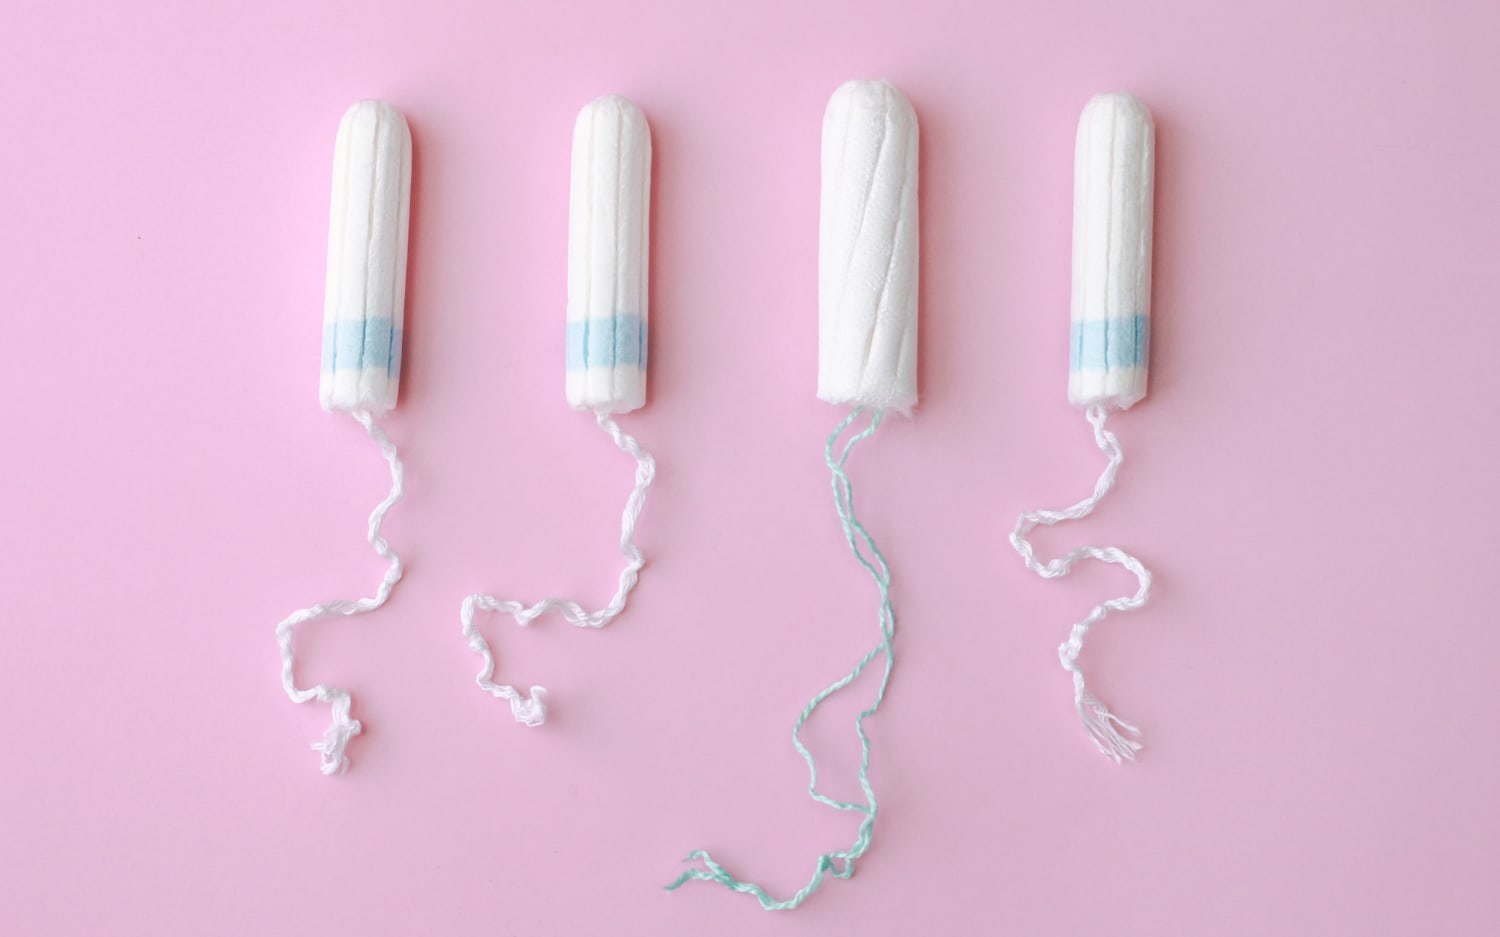 Tampon Shortage in 2022? Makers of Tampax and Kotex In